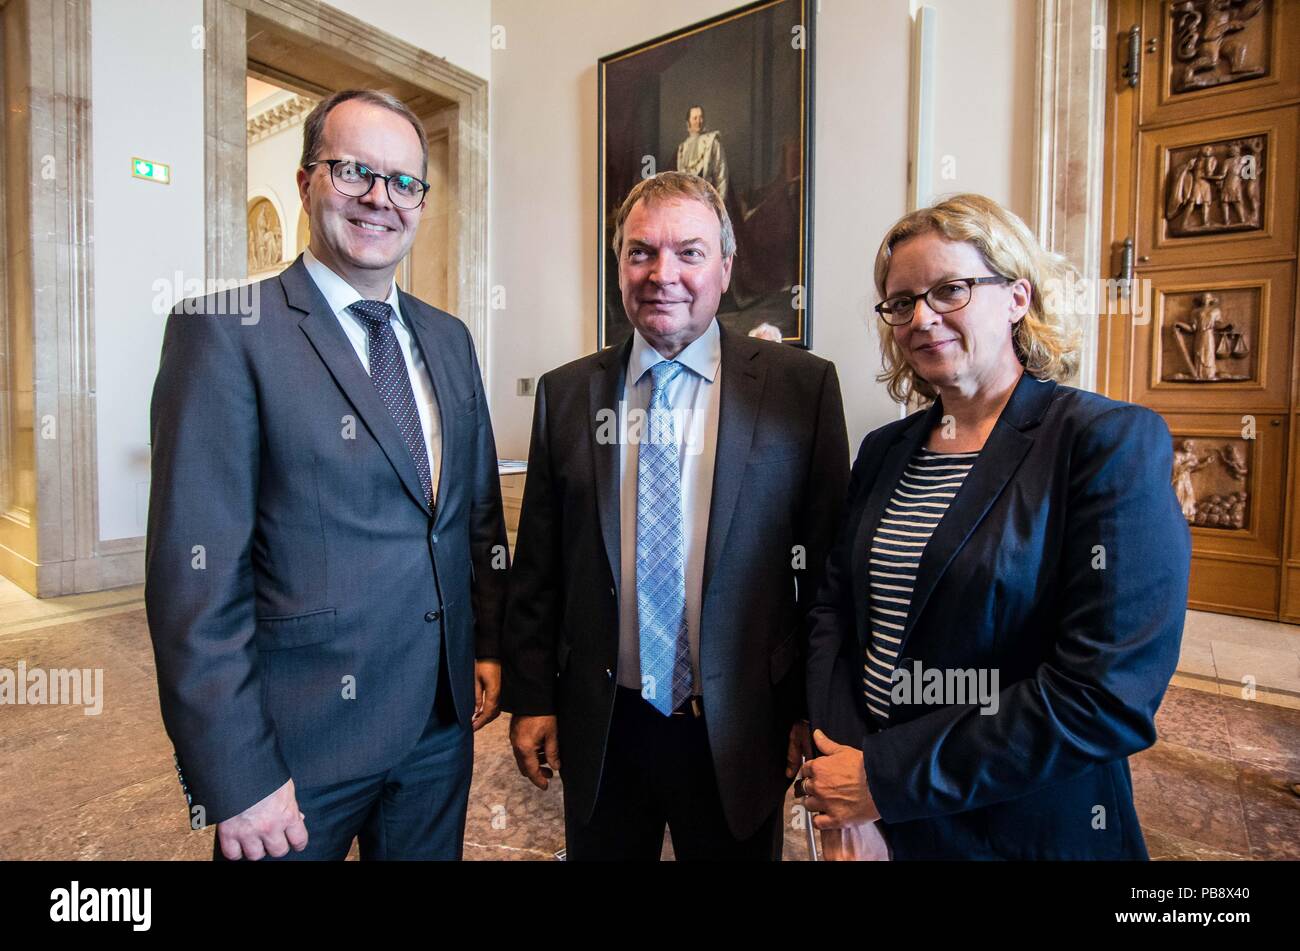 Munich, Bavaria, Germany. 27th July, 2018. MARKUS RINDERSPACHER, Lifeline Captain CLAUS PETER REISCH, NATASCHA KOHNEN. Captain Claus Peter Reisch of the Mission Lifeline NGO received the Europa-Preis (Europe Award) at Bavaria's Landtag (Parliament) for his humanitarian engagement in the Mediterranean in rescuing hundreds migrants in danger of drowning. Reisch was recently arrested in Malta, facing various charges related to the use of the vessel in rescue activities. He is currently out on bail and has surrendered his passport while awaiting trial. According to the UN, some 1,500 migrant Stock Photo